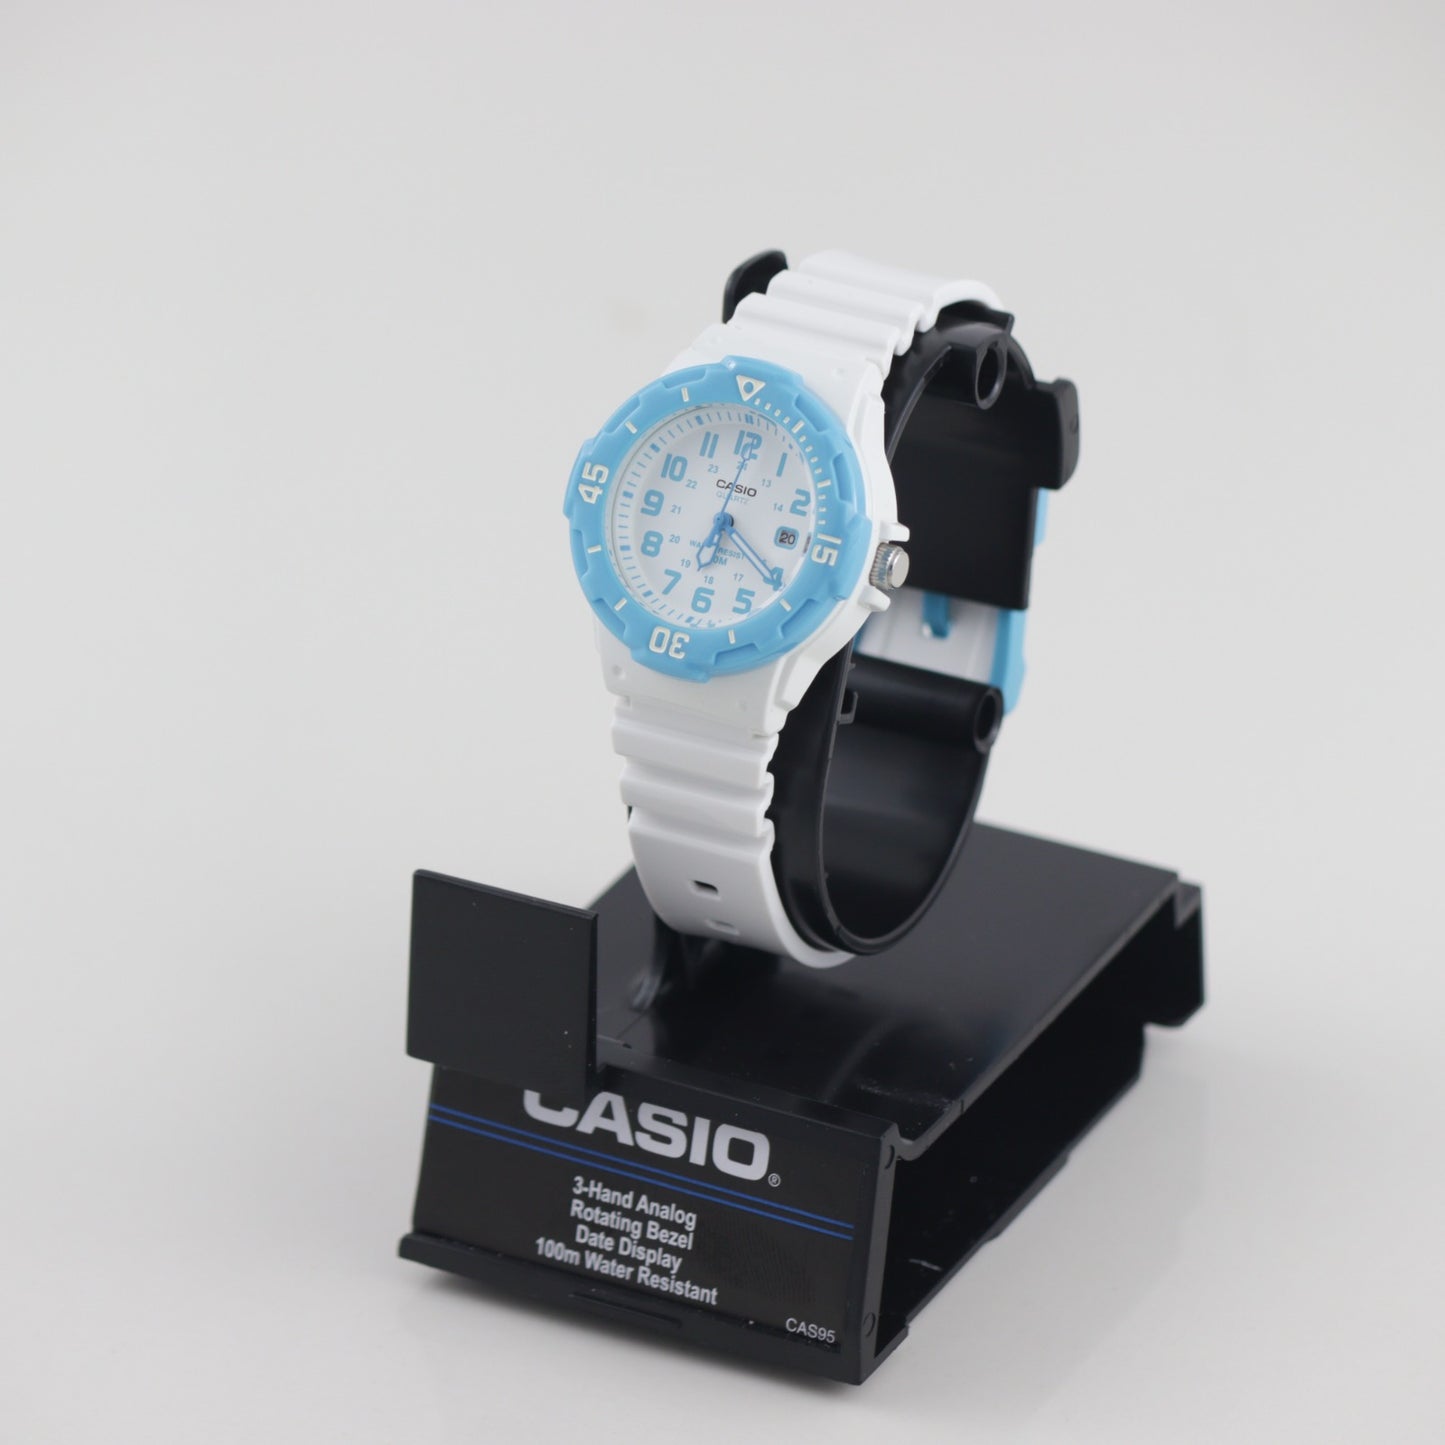 Casio Women's Dive Style Watch, White/Blue Accents